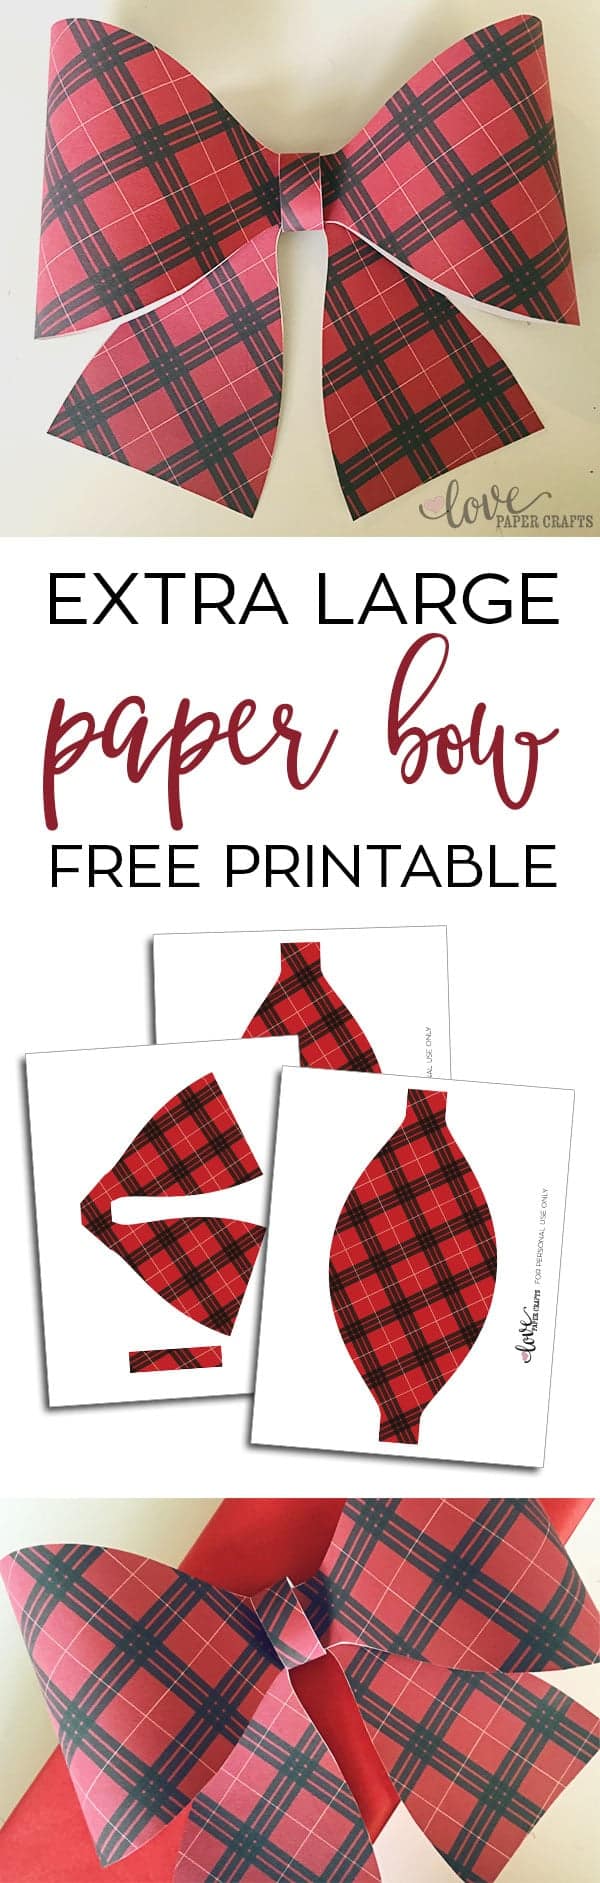 Free Printable Paper Bow | LovePaperCrafts.com